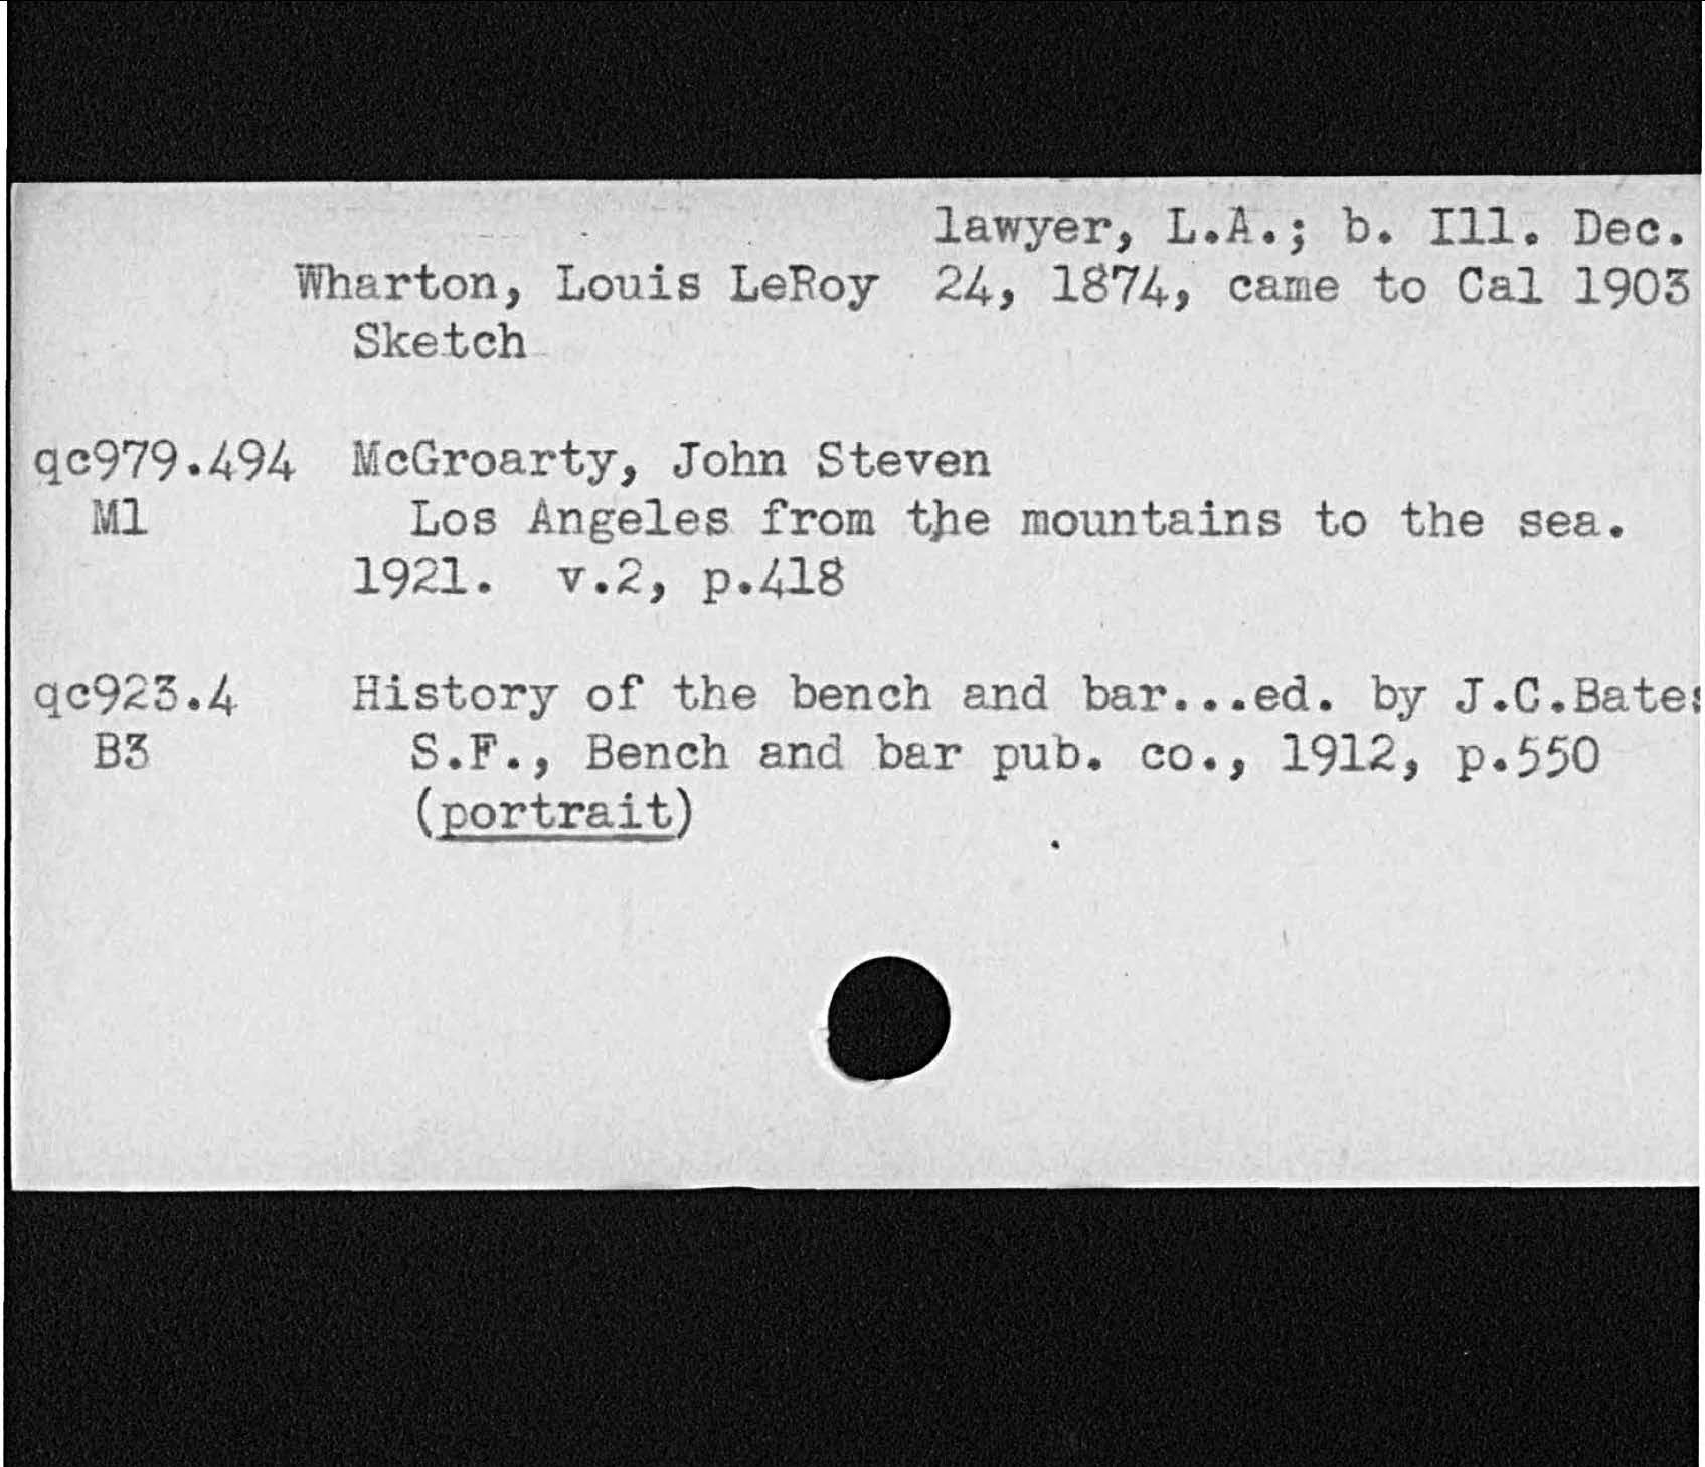 lawyer, L. A. b. Ill. Dec.Wharton Louis LeRoy 24, 1874, came to Cal 1905SketchMlMcGroarty, John StevenLos Angeles from the mountains1921 v. 2, p. 418to the sea.History of the bench and bared. by J. C. BateS. F. Bench and bar pub. co. 1912, p. 550portrait   qa979. 494  qc925. 4  B3